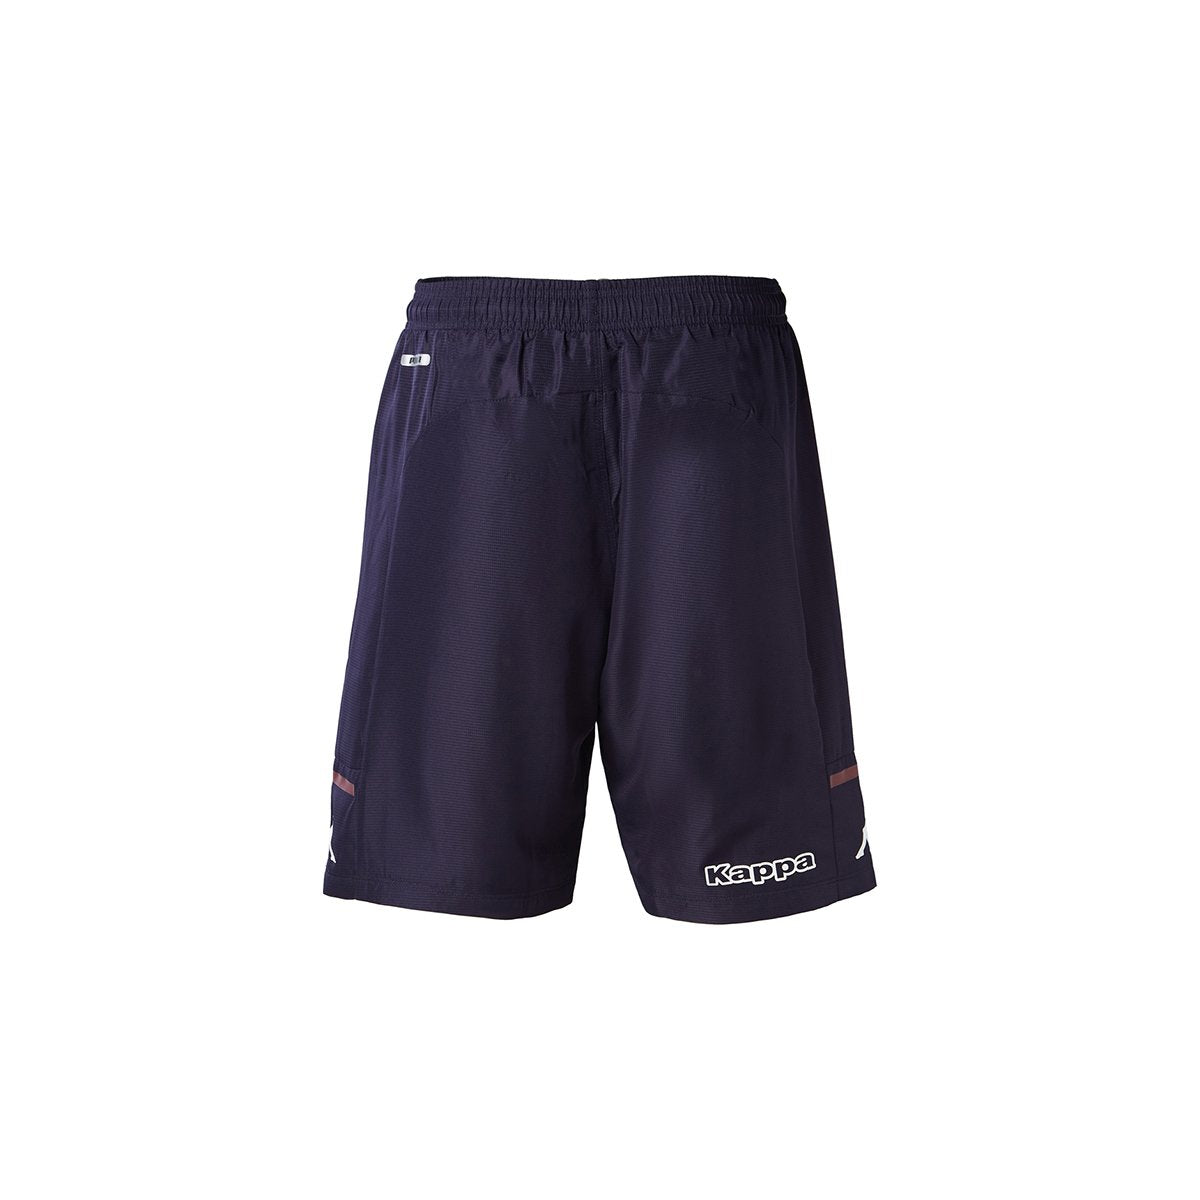 Short Alberg Pro 4 Ubb Rugby Homme - image 3